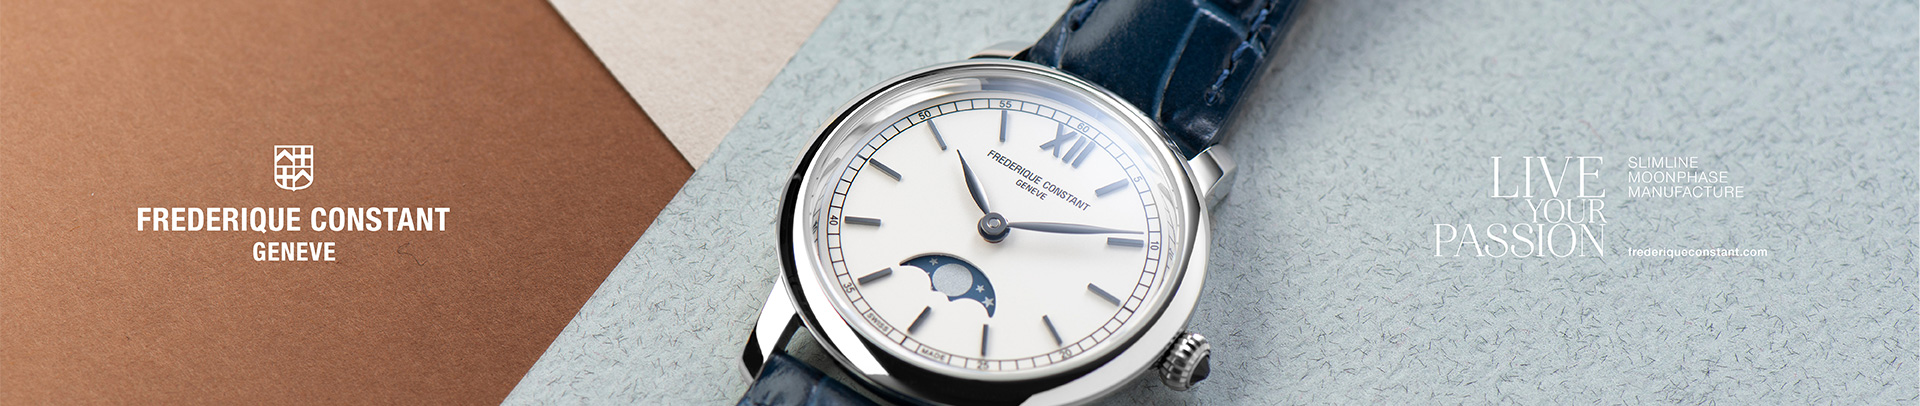 Frederique Constant | Functions: Minutes | Water Resistance: WR50/5Bar [Still Water Swimming]